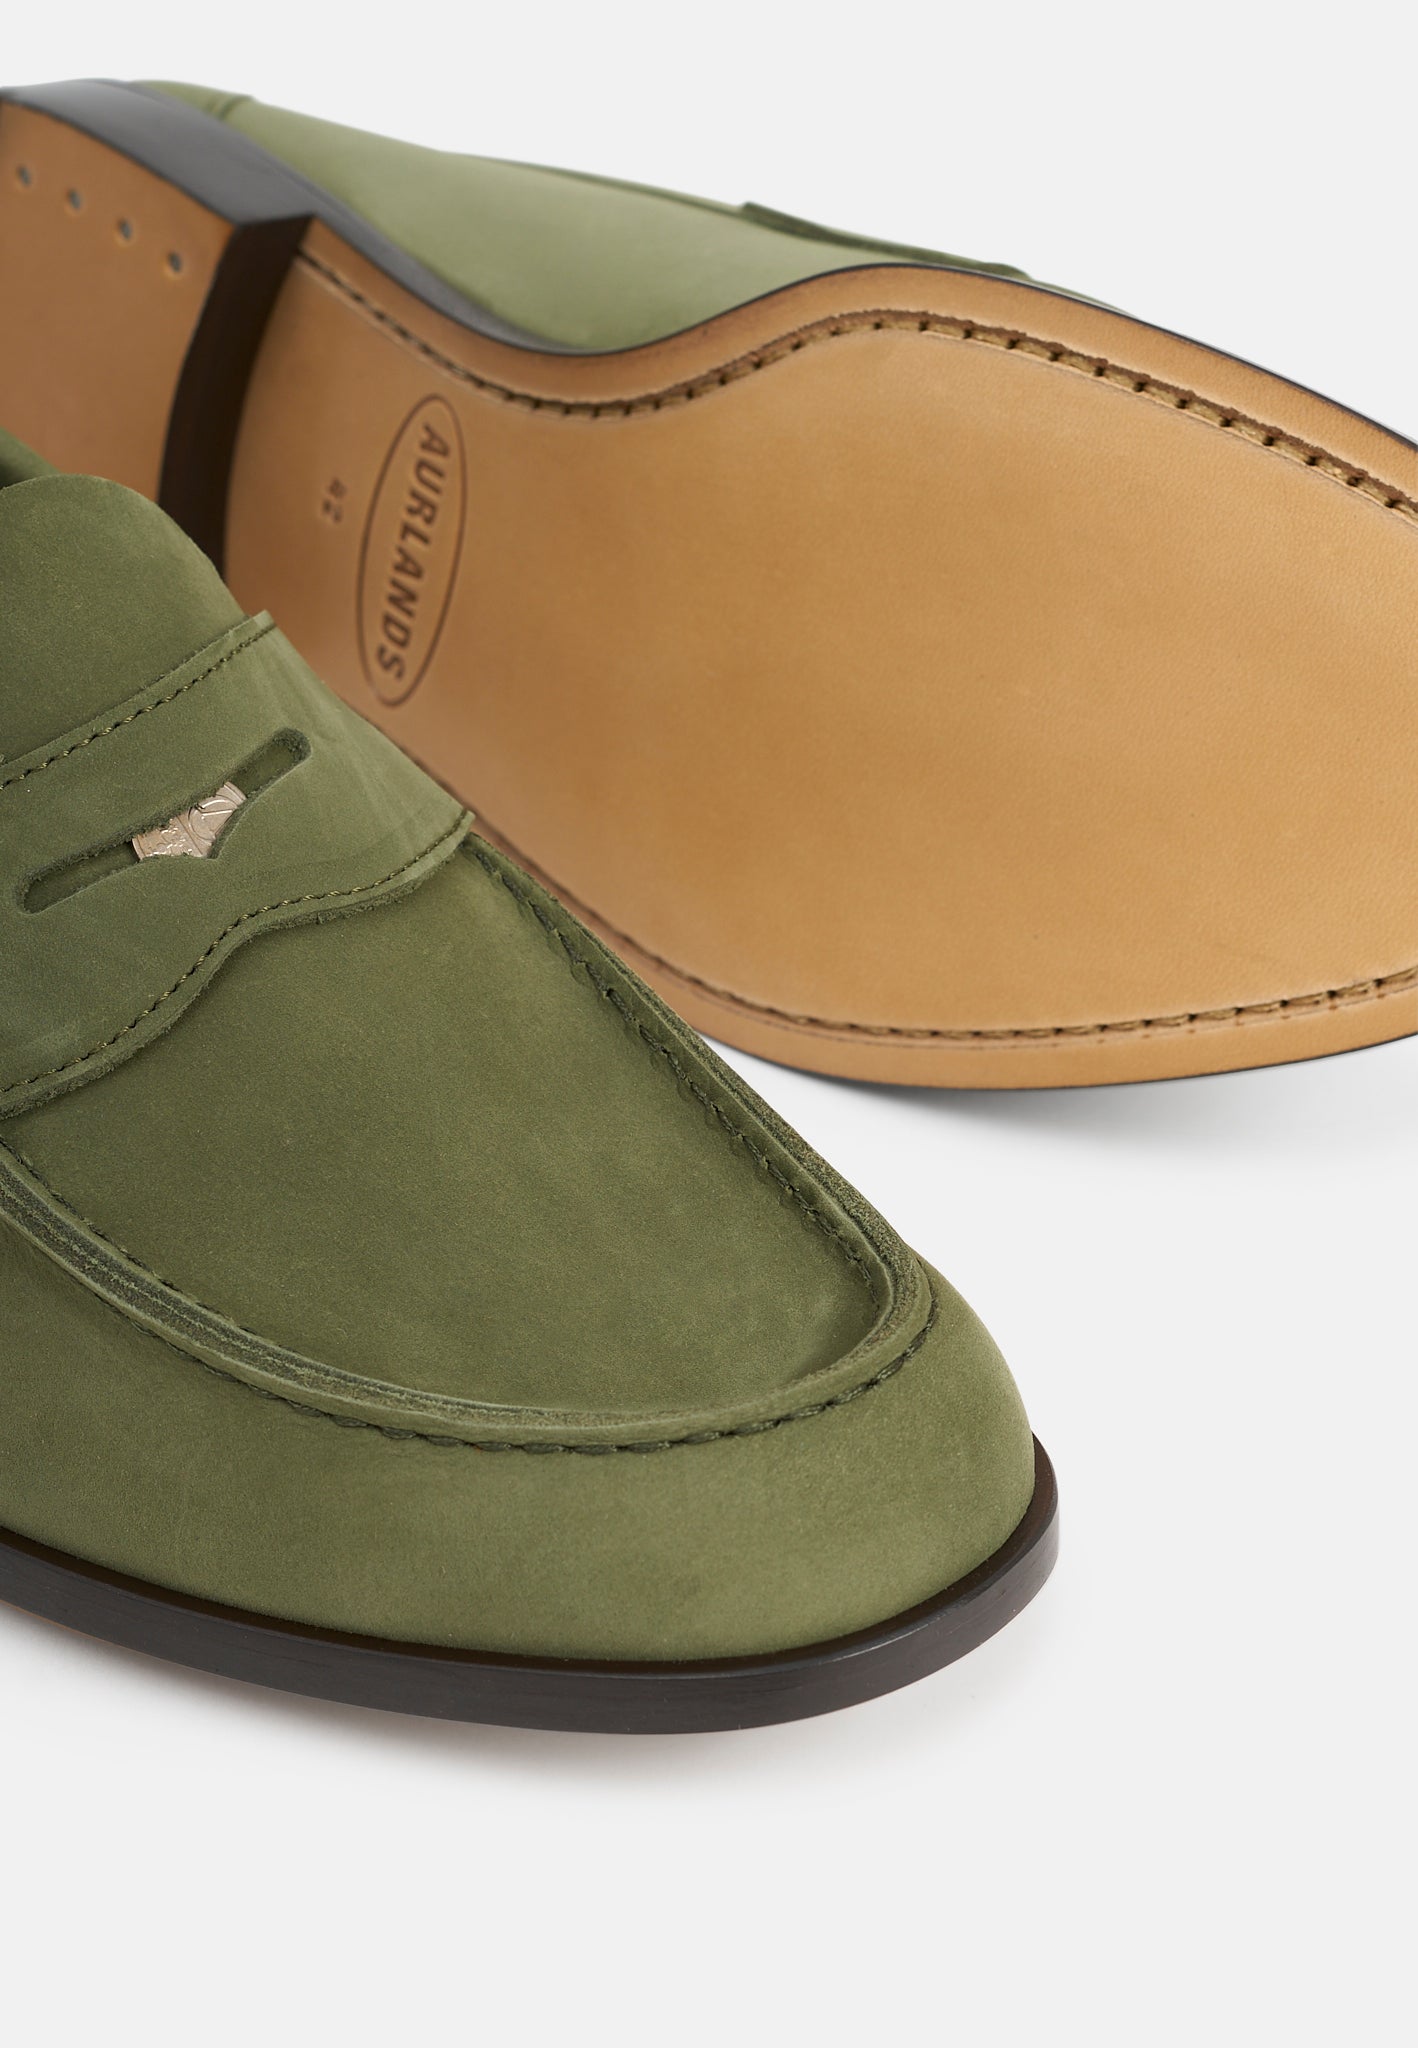 Buxton Forrest Nubuck - The Original Penny Loafer